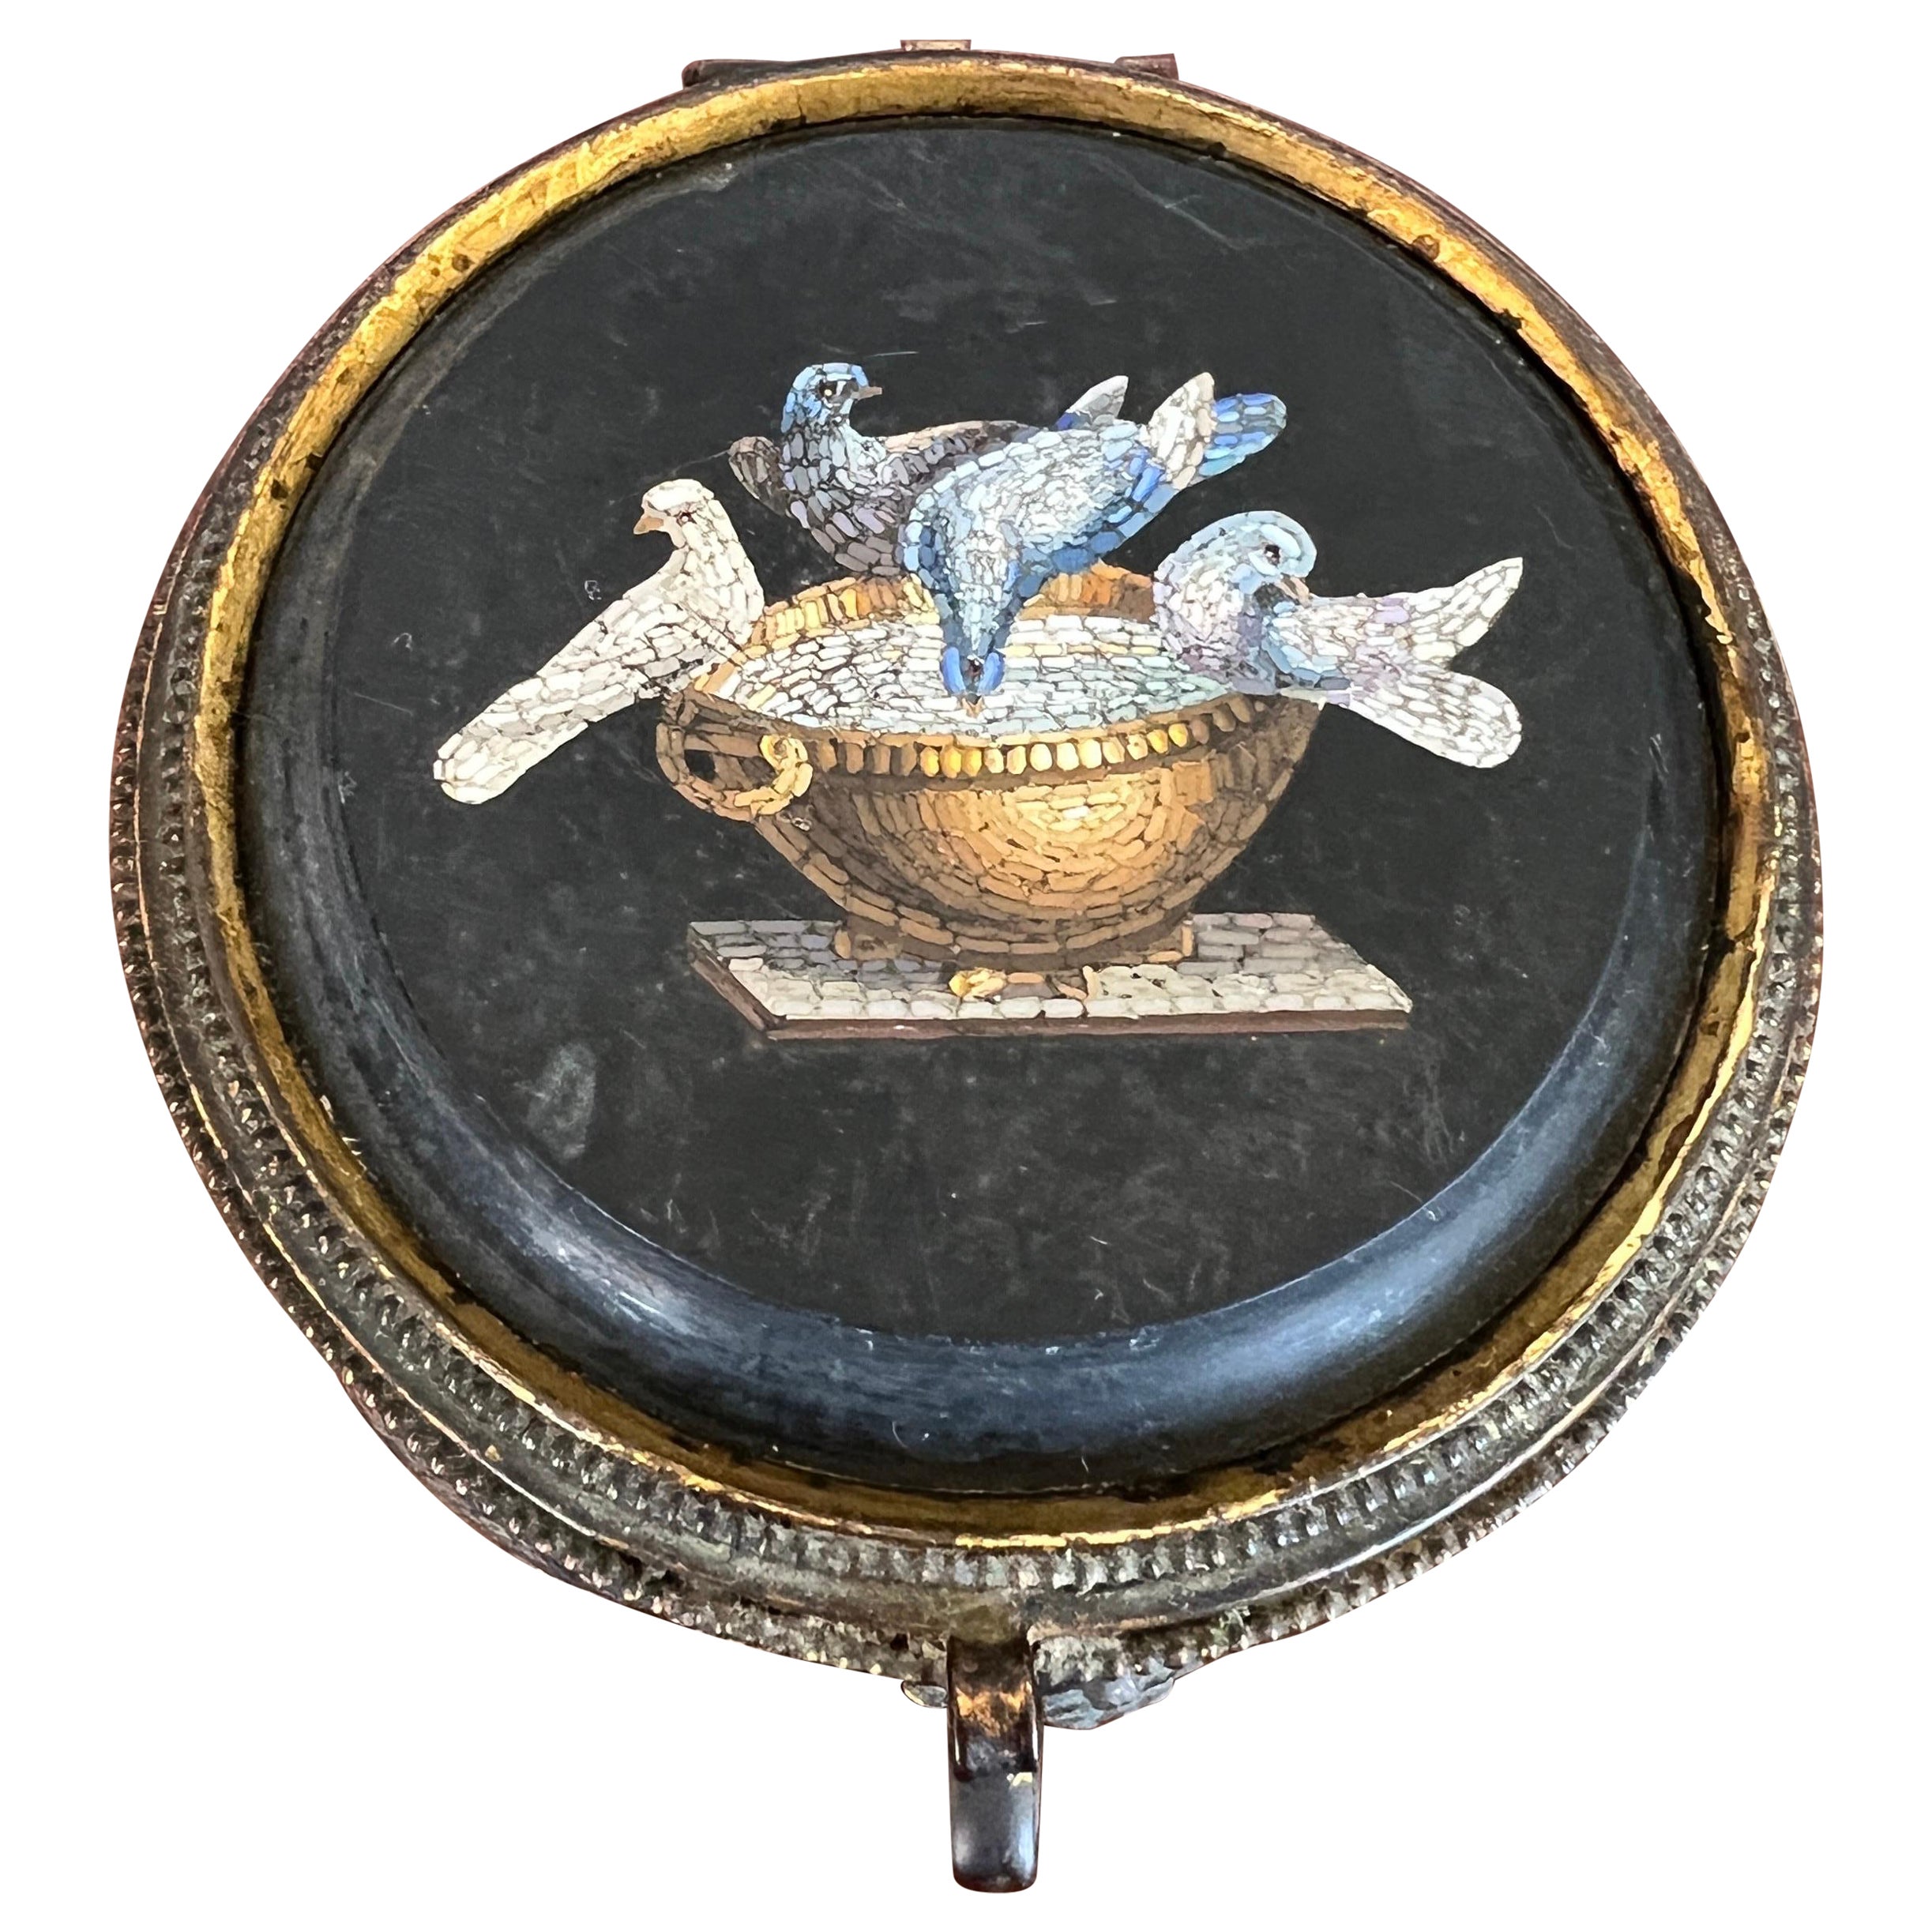 19th C. Italian Grand Tour Micro-Mosaic "Doves of Pliny" Box After Antiquity